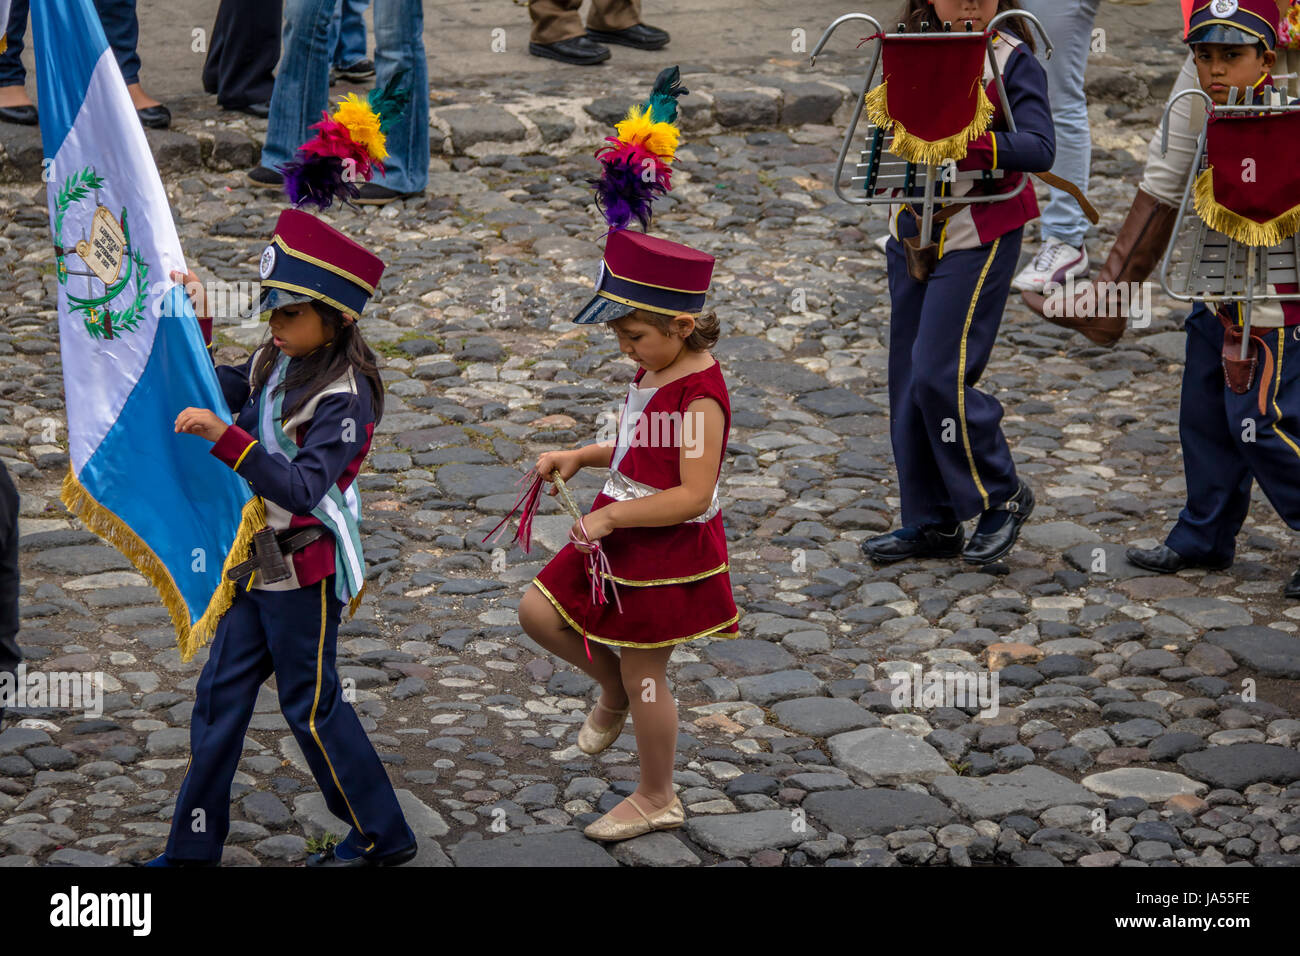 Group of small children Marching Band in Uniforms - Antigua, Guatemala Stock Photo